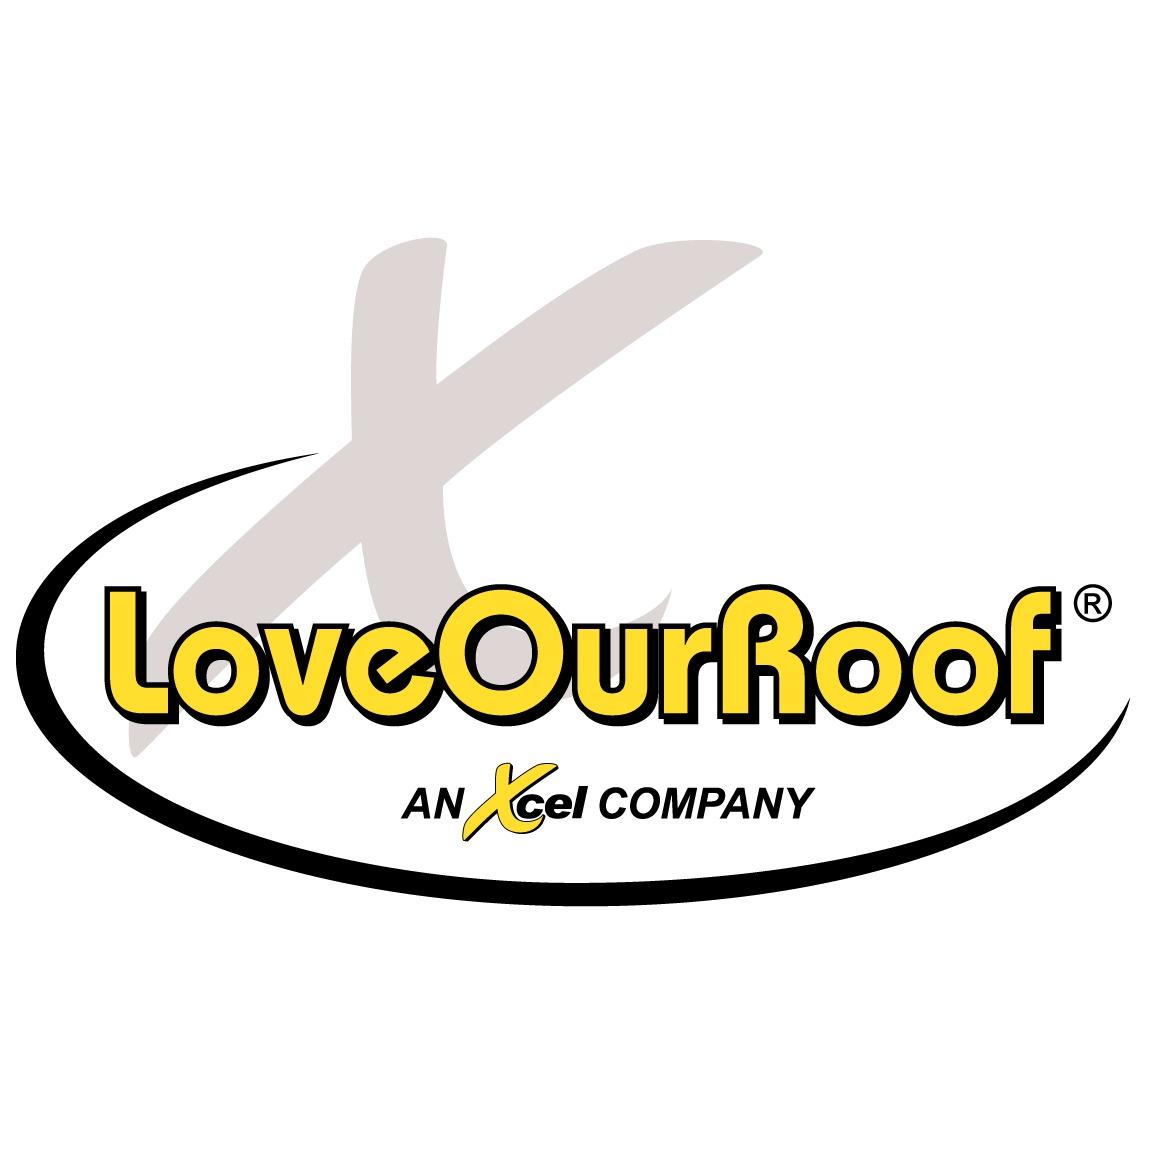 LoveOurRoof, an Xcel Company - Sioux City, IA 51106 - (712)435-3000 | ShowMeLocal.com